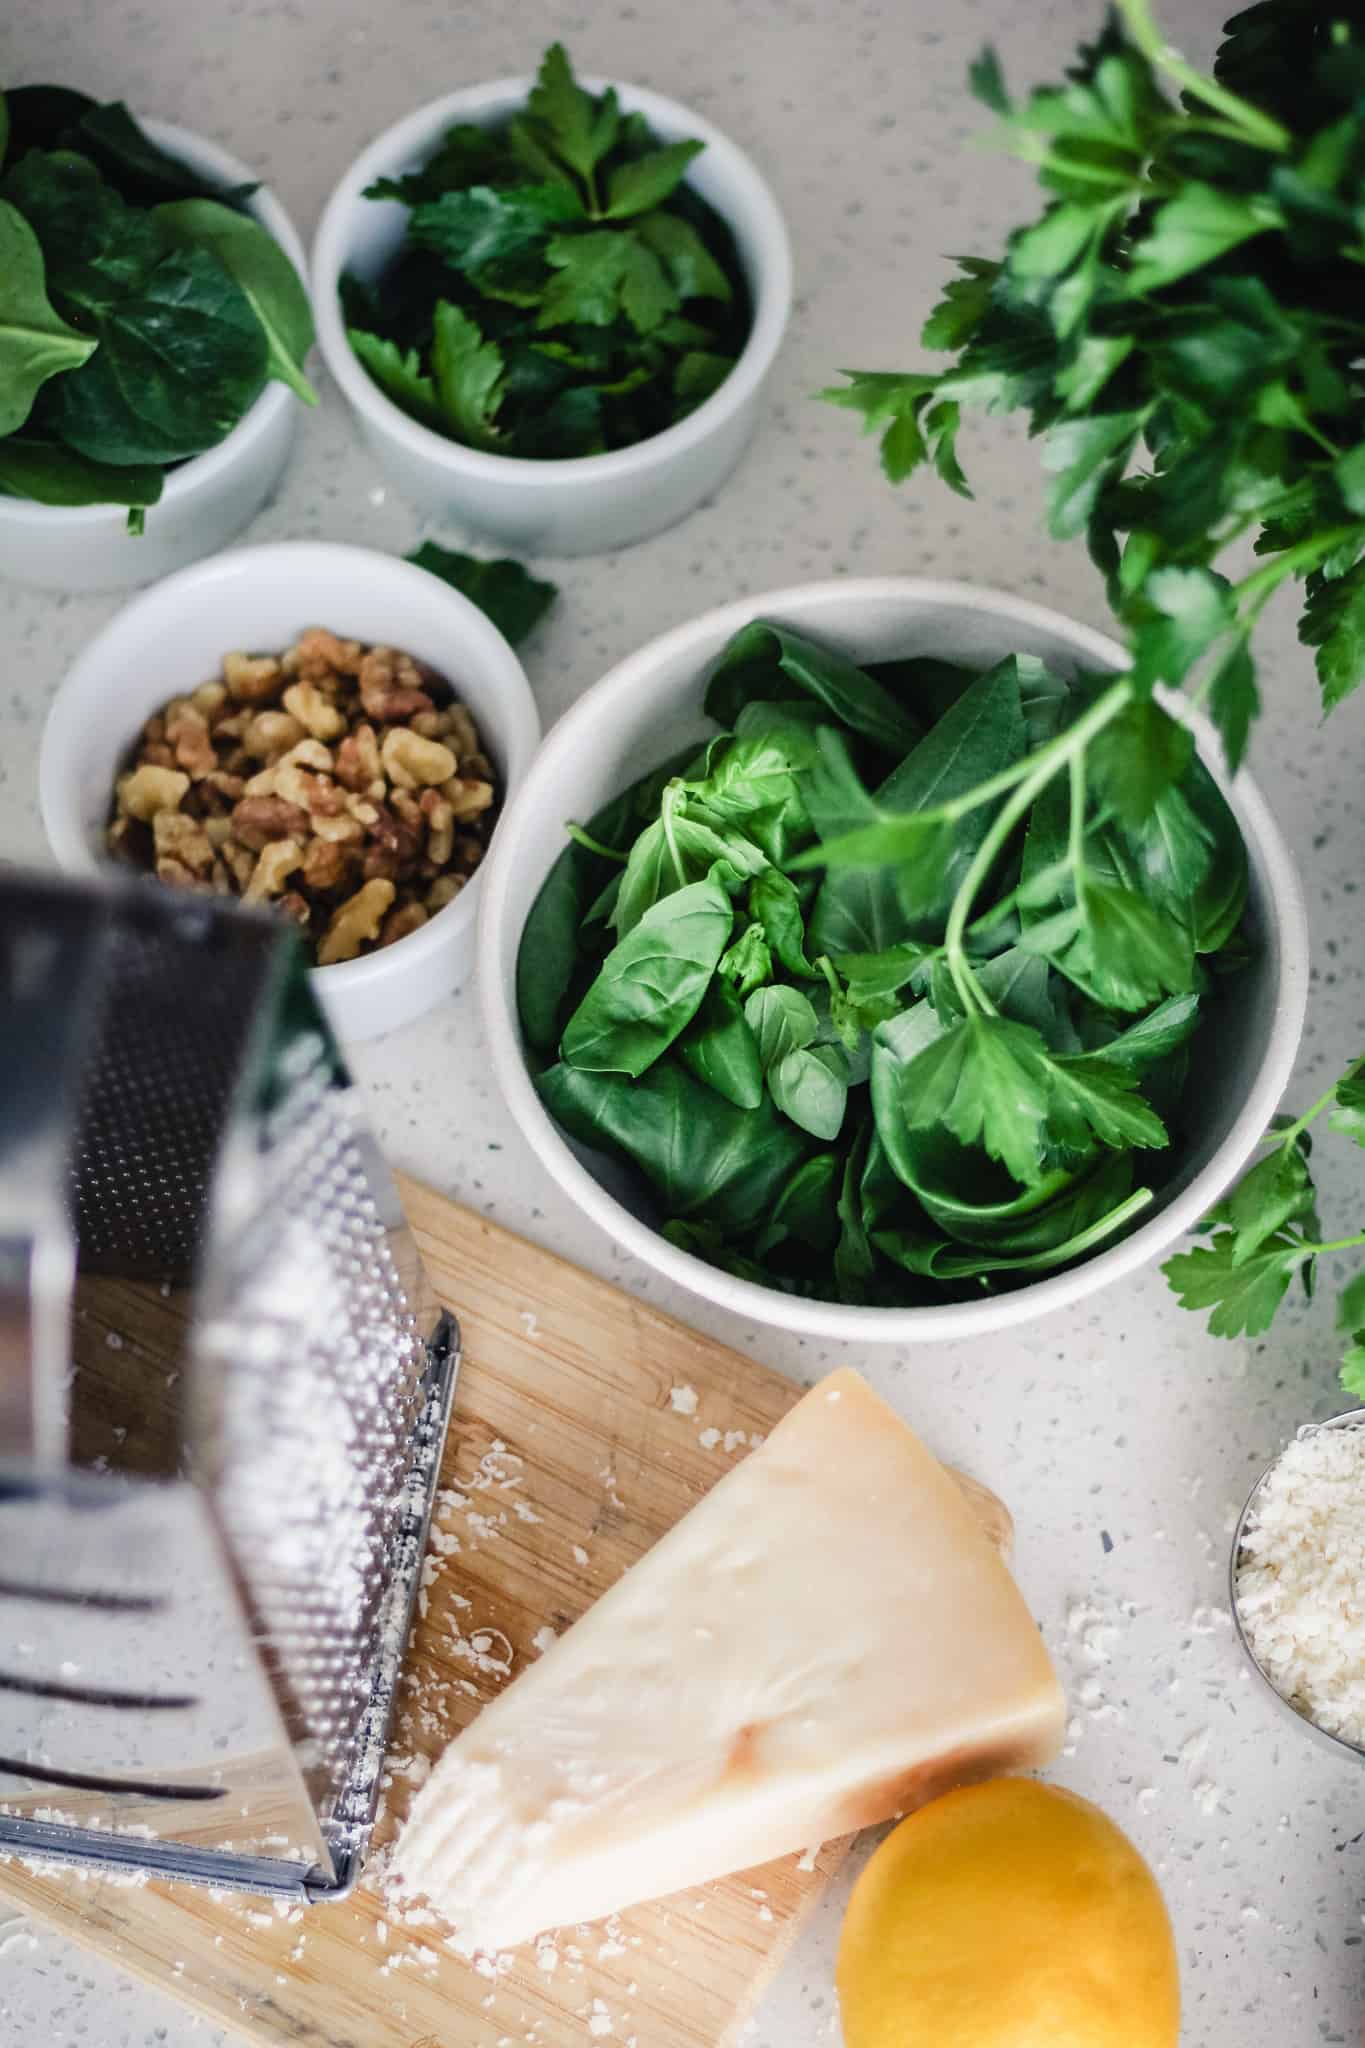 A wedge of parmesan cheese on a cutting board with a grater next to lemon and bowls of basil, walnuts, spinach, and parsley.